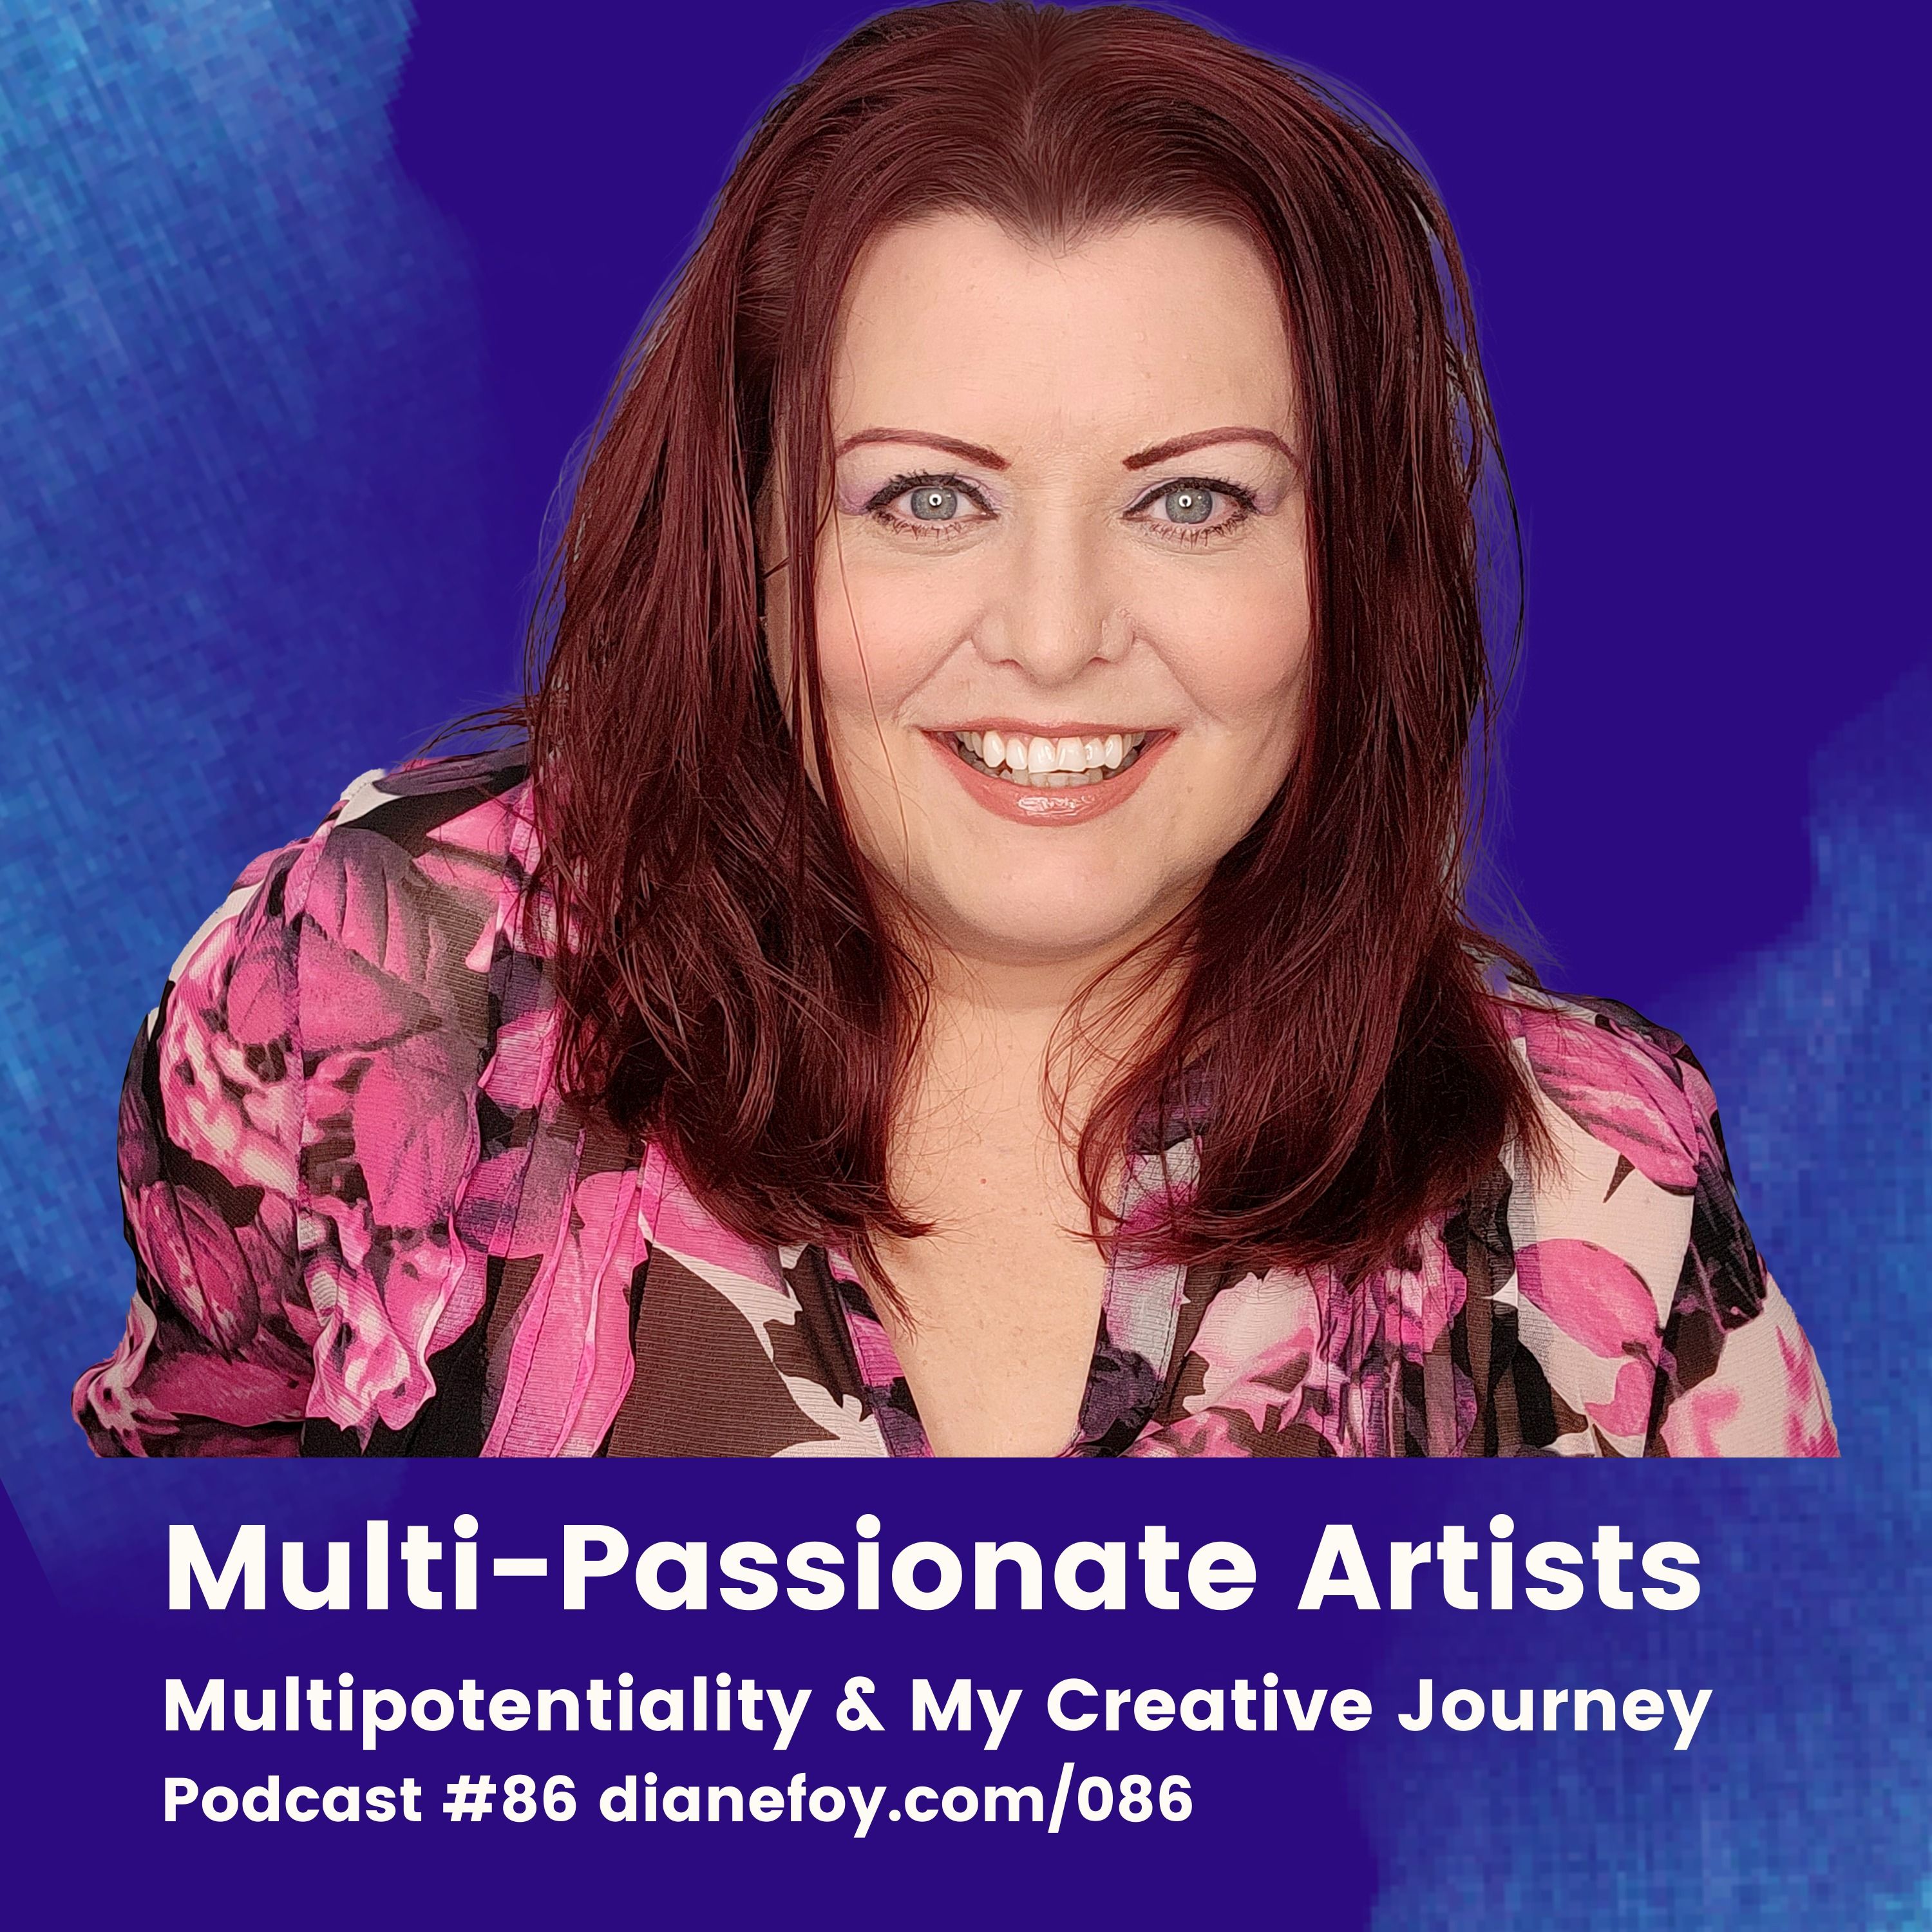 Multipotentiality & My Creative Journey